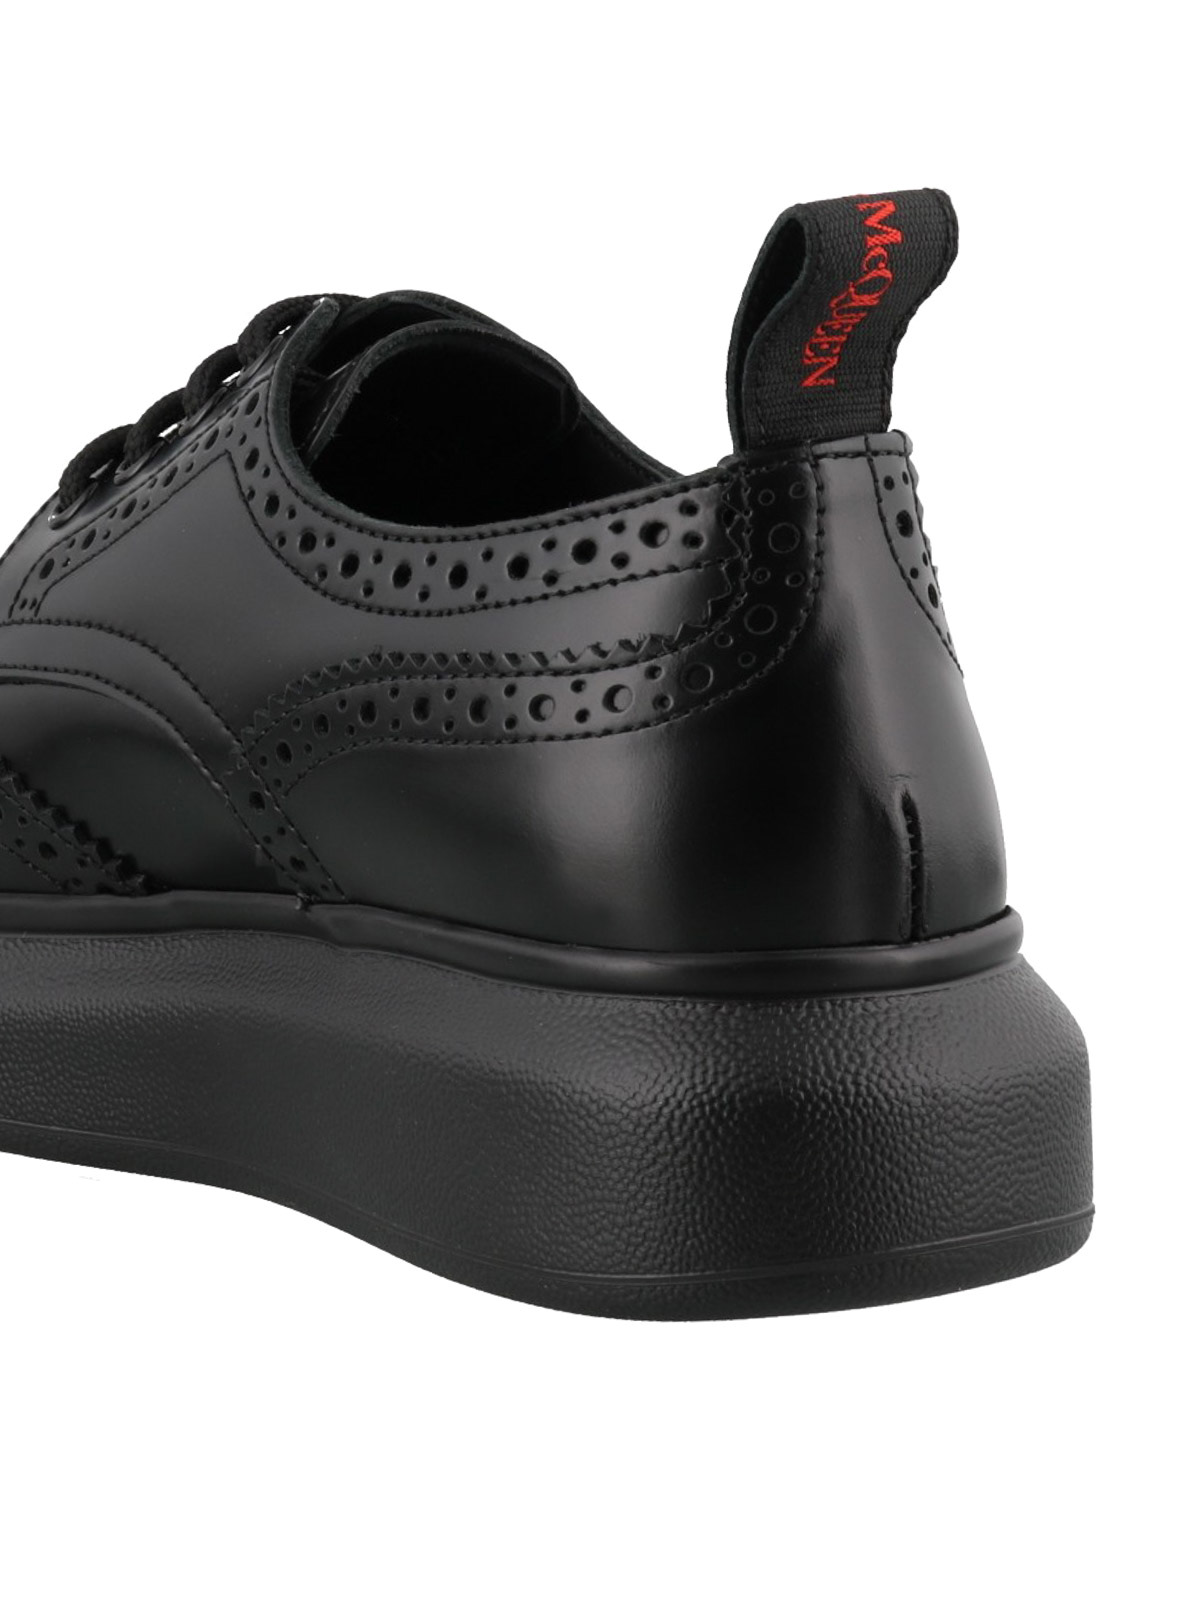 Lace-ups shoes Alexander Mcqueen - Hybrid lace-up brogue shoes 